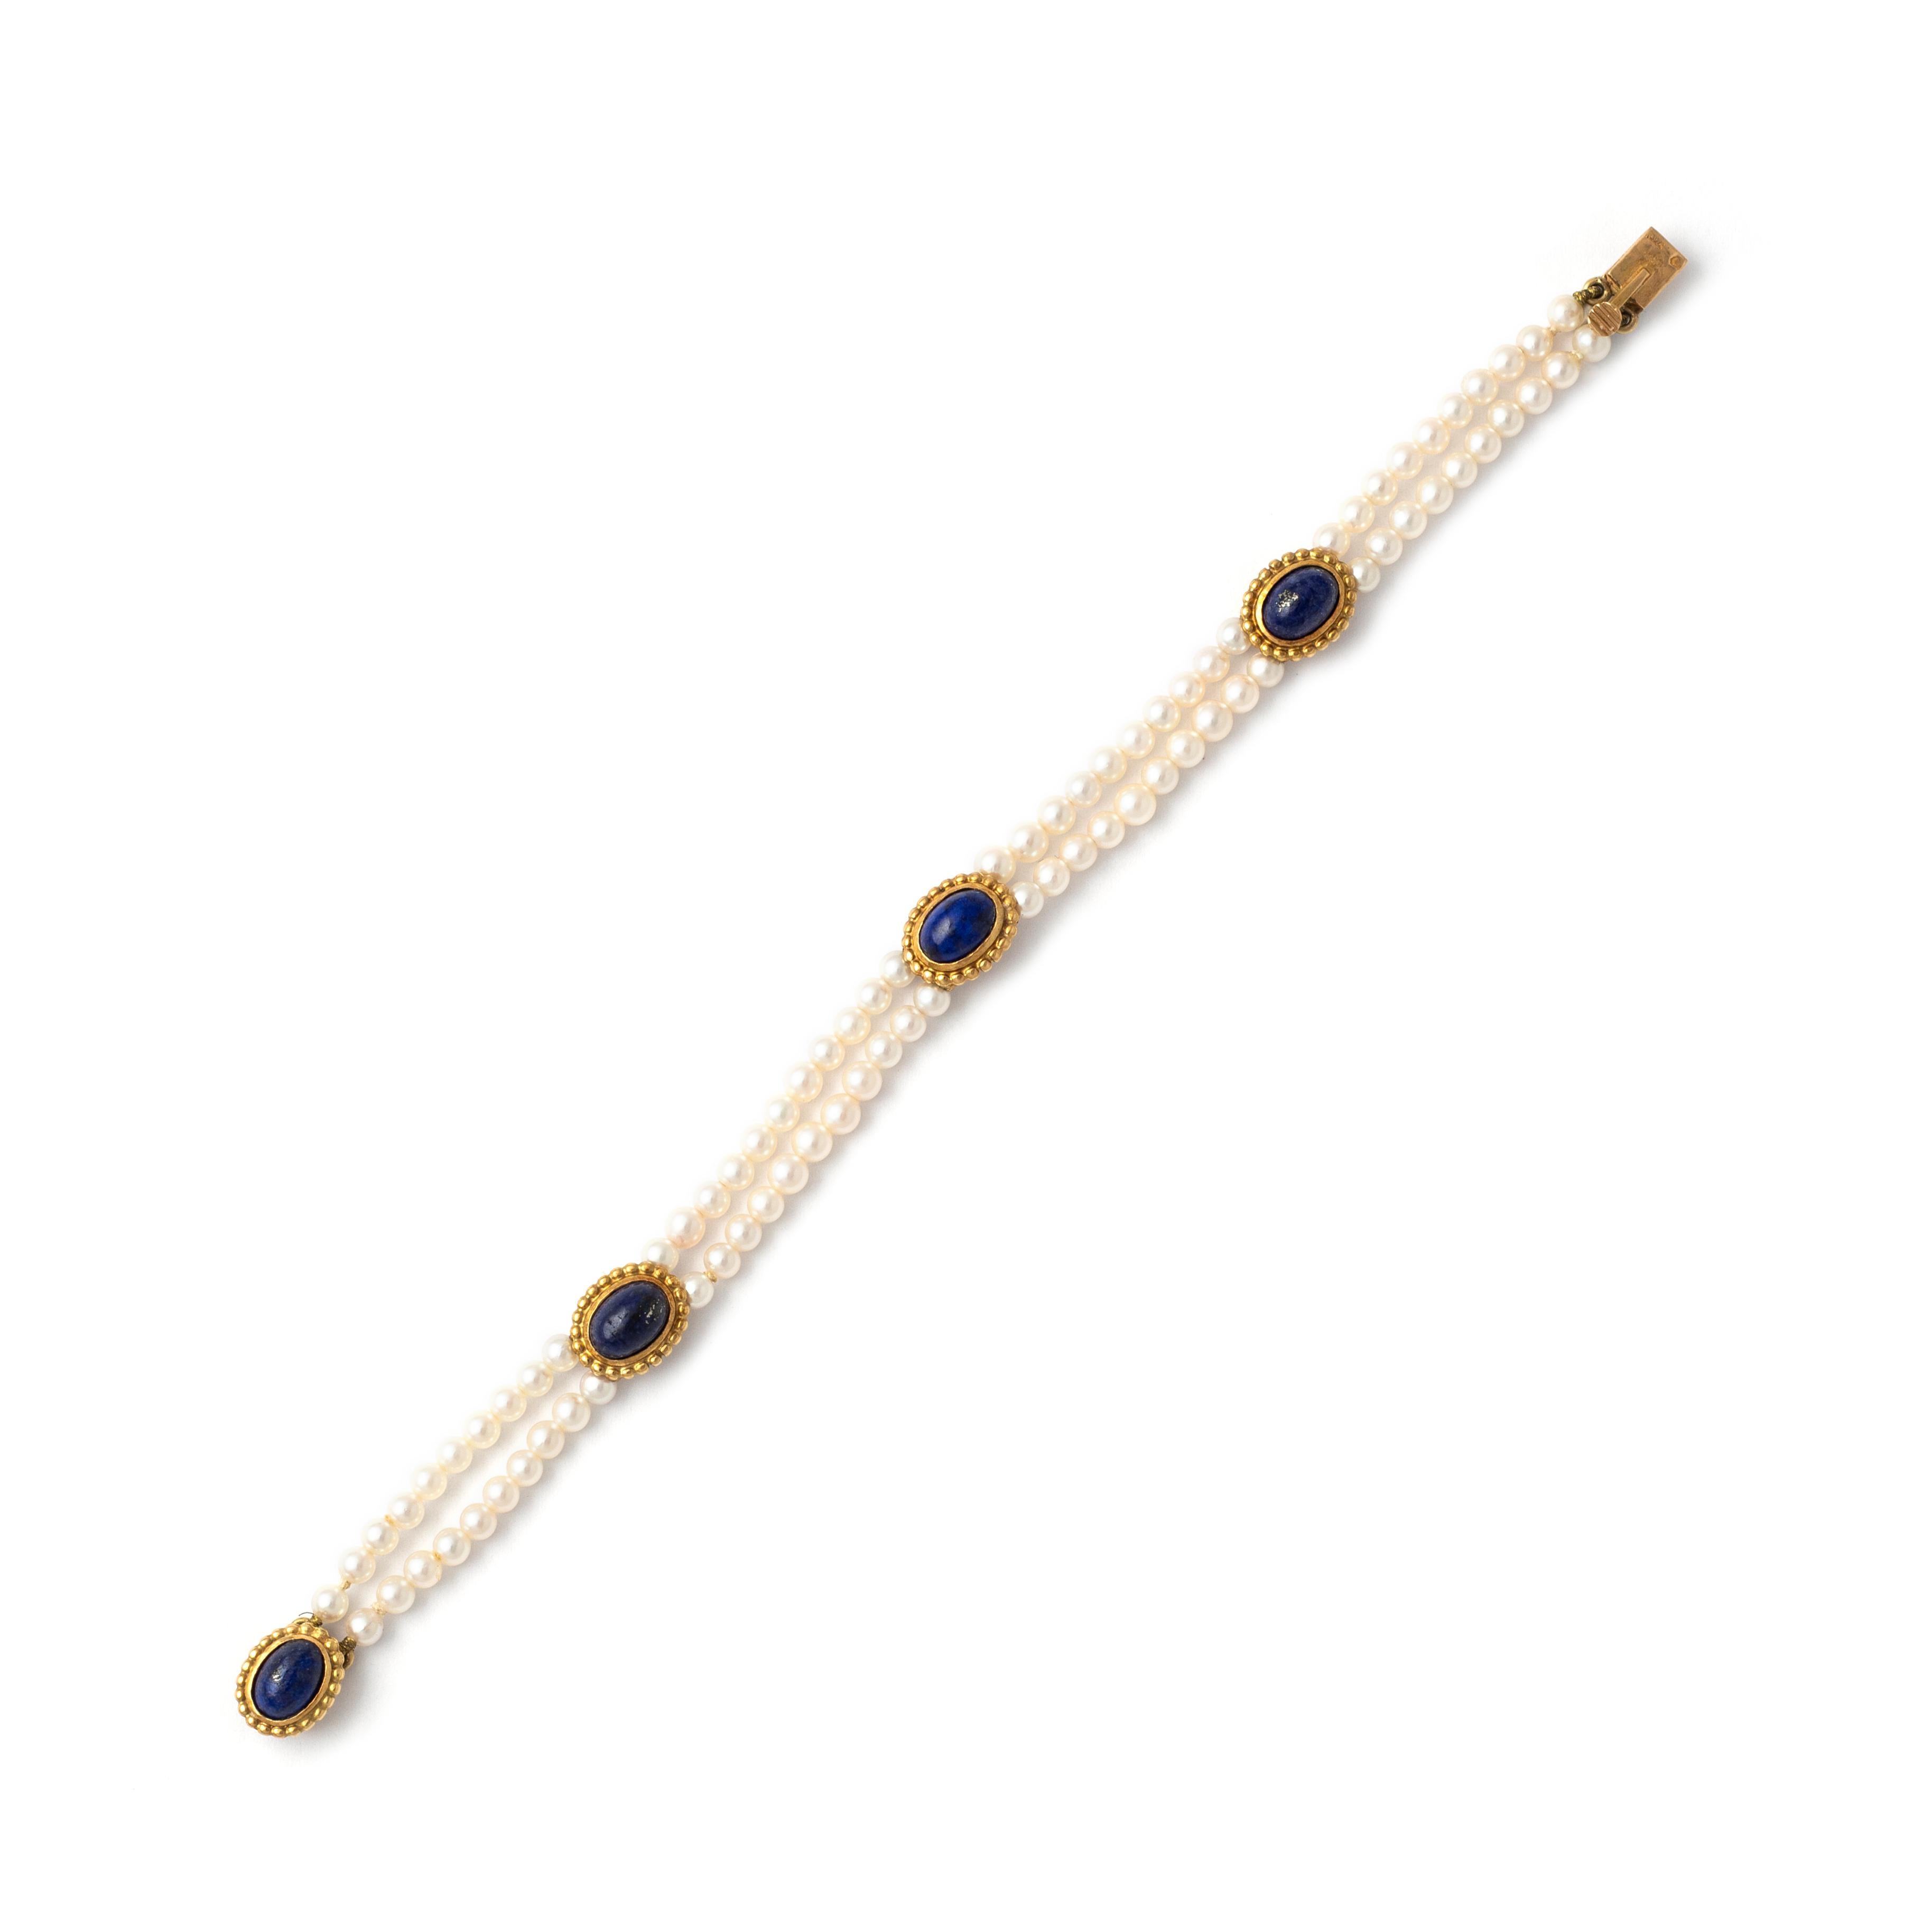 French Vintage Bracelet.
Pearls and Lapis Lazuli cabochon in yellow gold 18K.
French marks.
Late 20th Century.
Total gross weight: 9.02 grams.
Length: approx. 16.50 centimeters.
